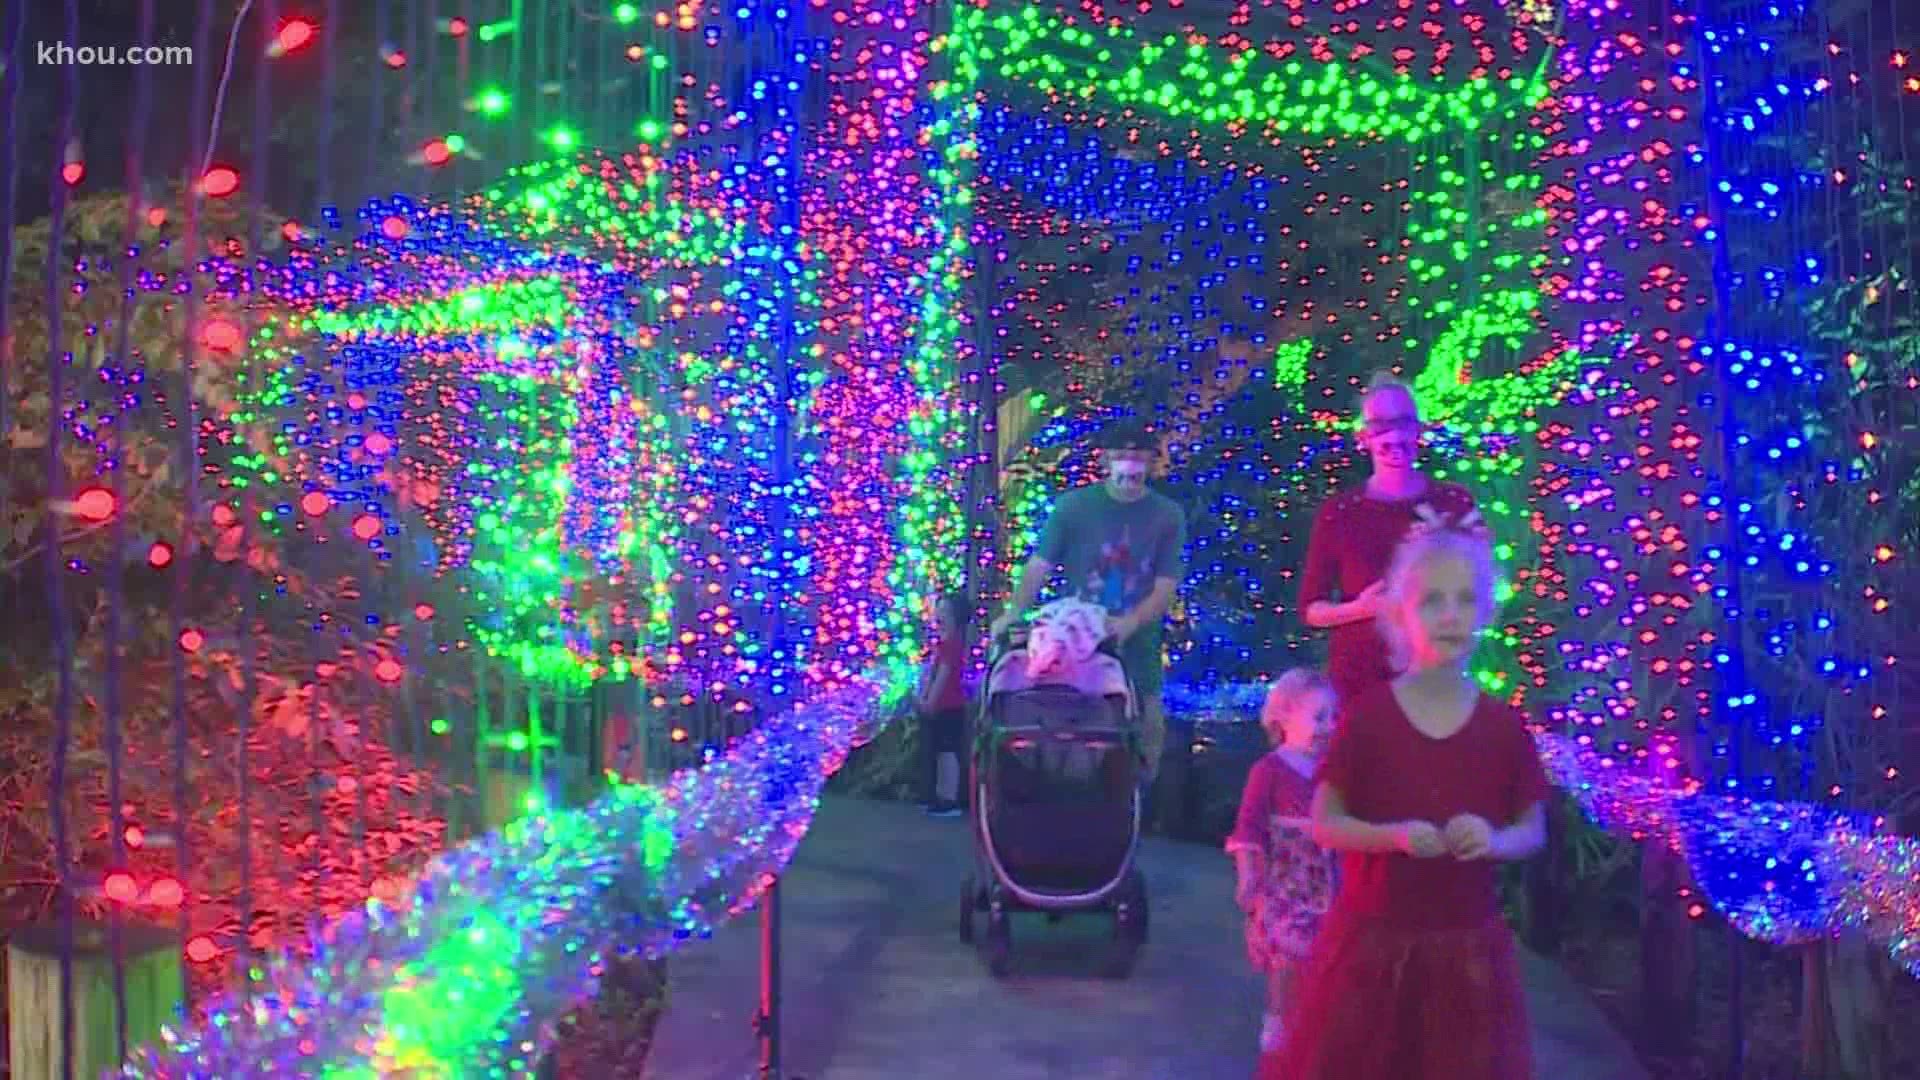 The Houston Zoo is holding its annual Zoo Lights and there are a few changes. Visitors must wear masks and buy tickets in advance.